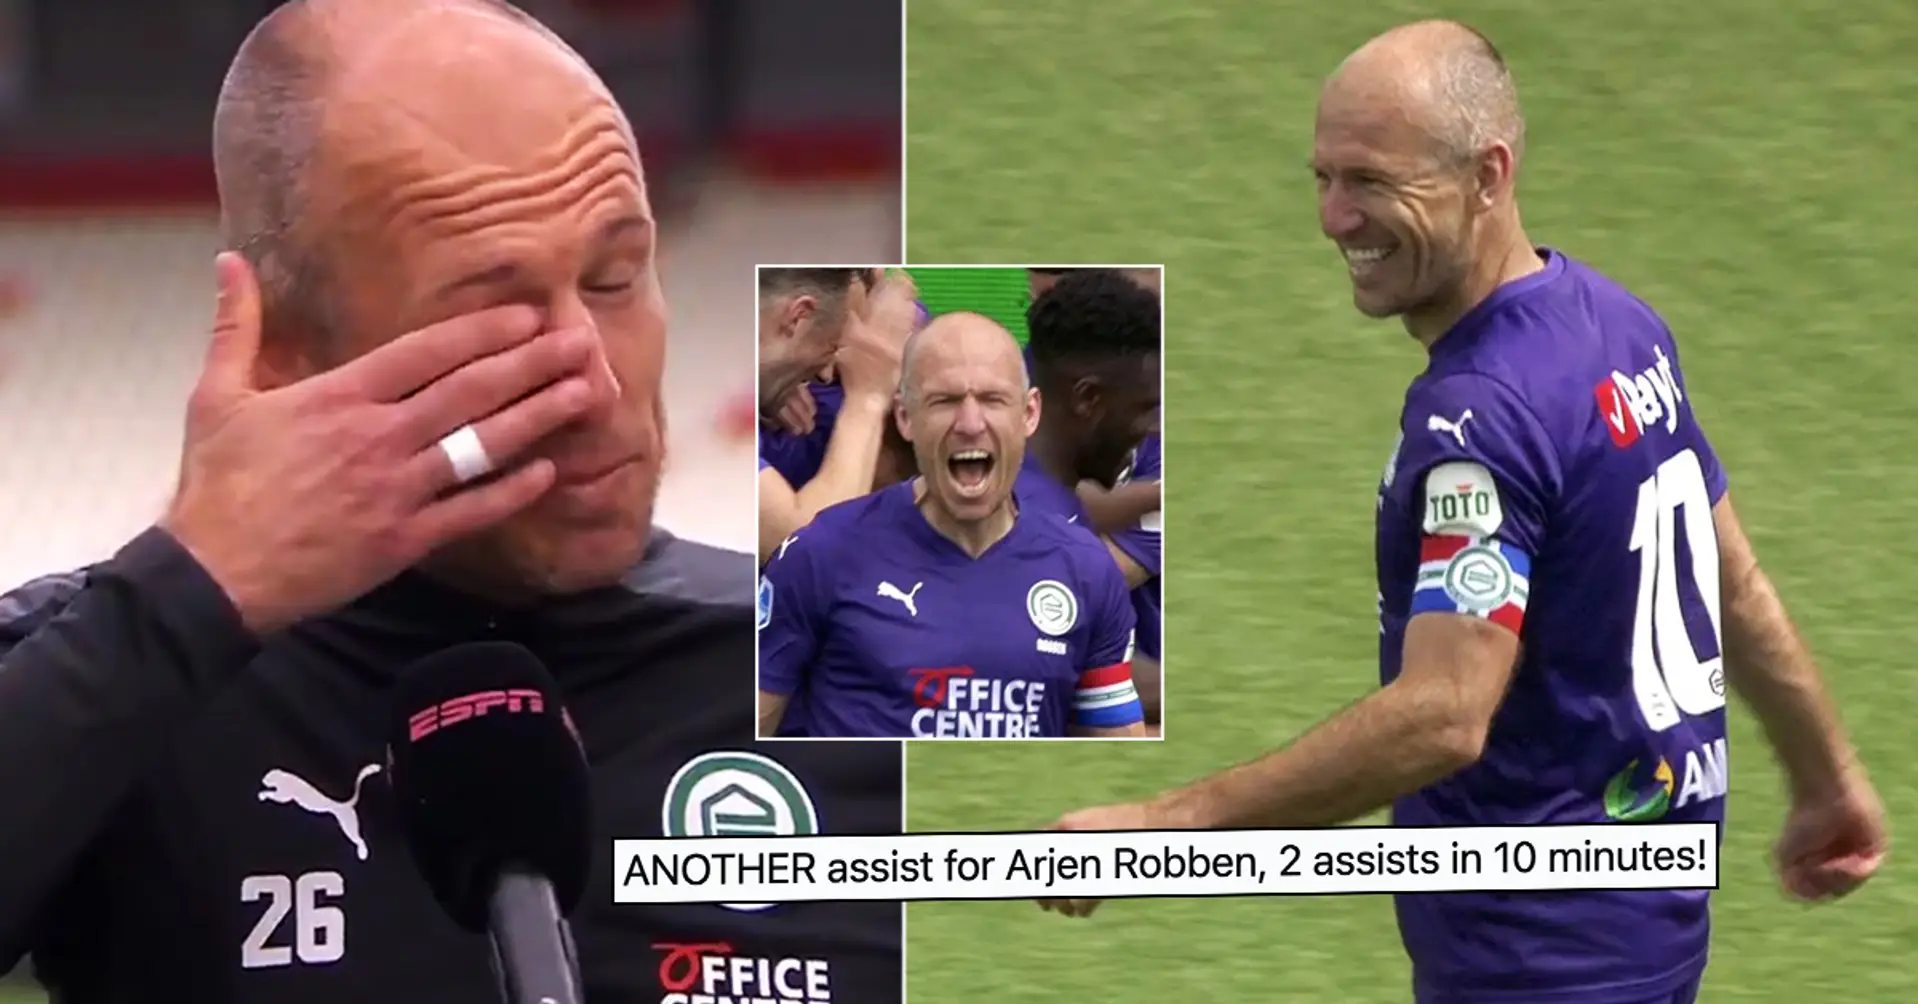 Arjen Robben cries in front of cameras after returning to football pitch and being asked about Euro 2021